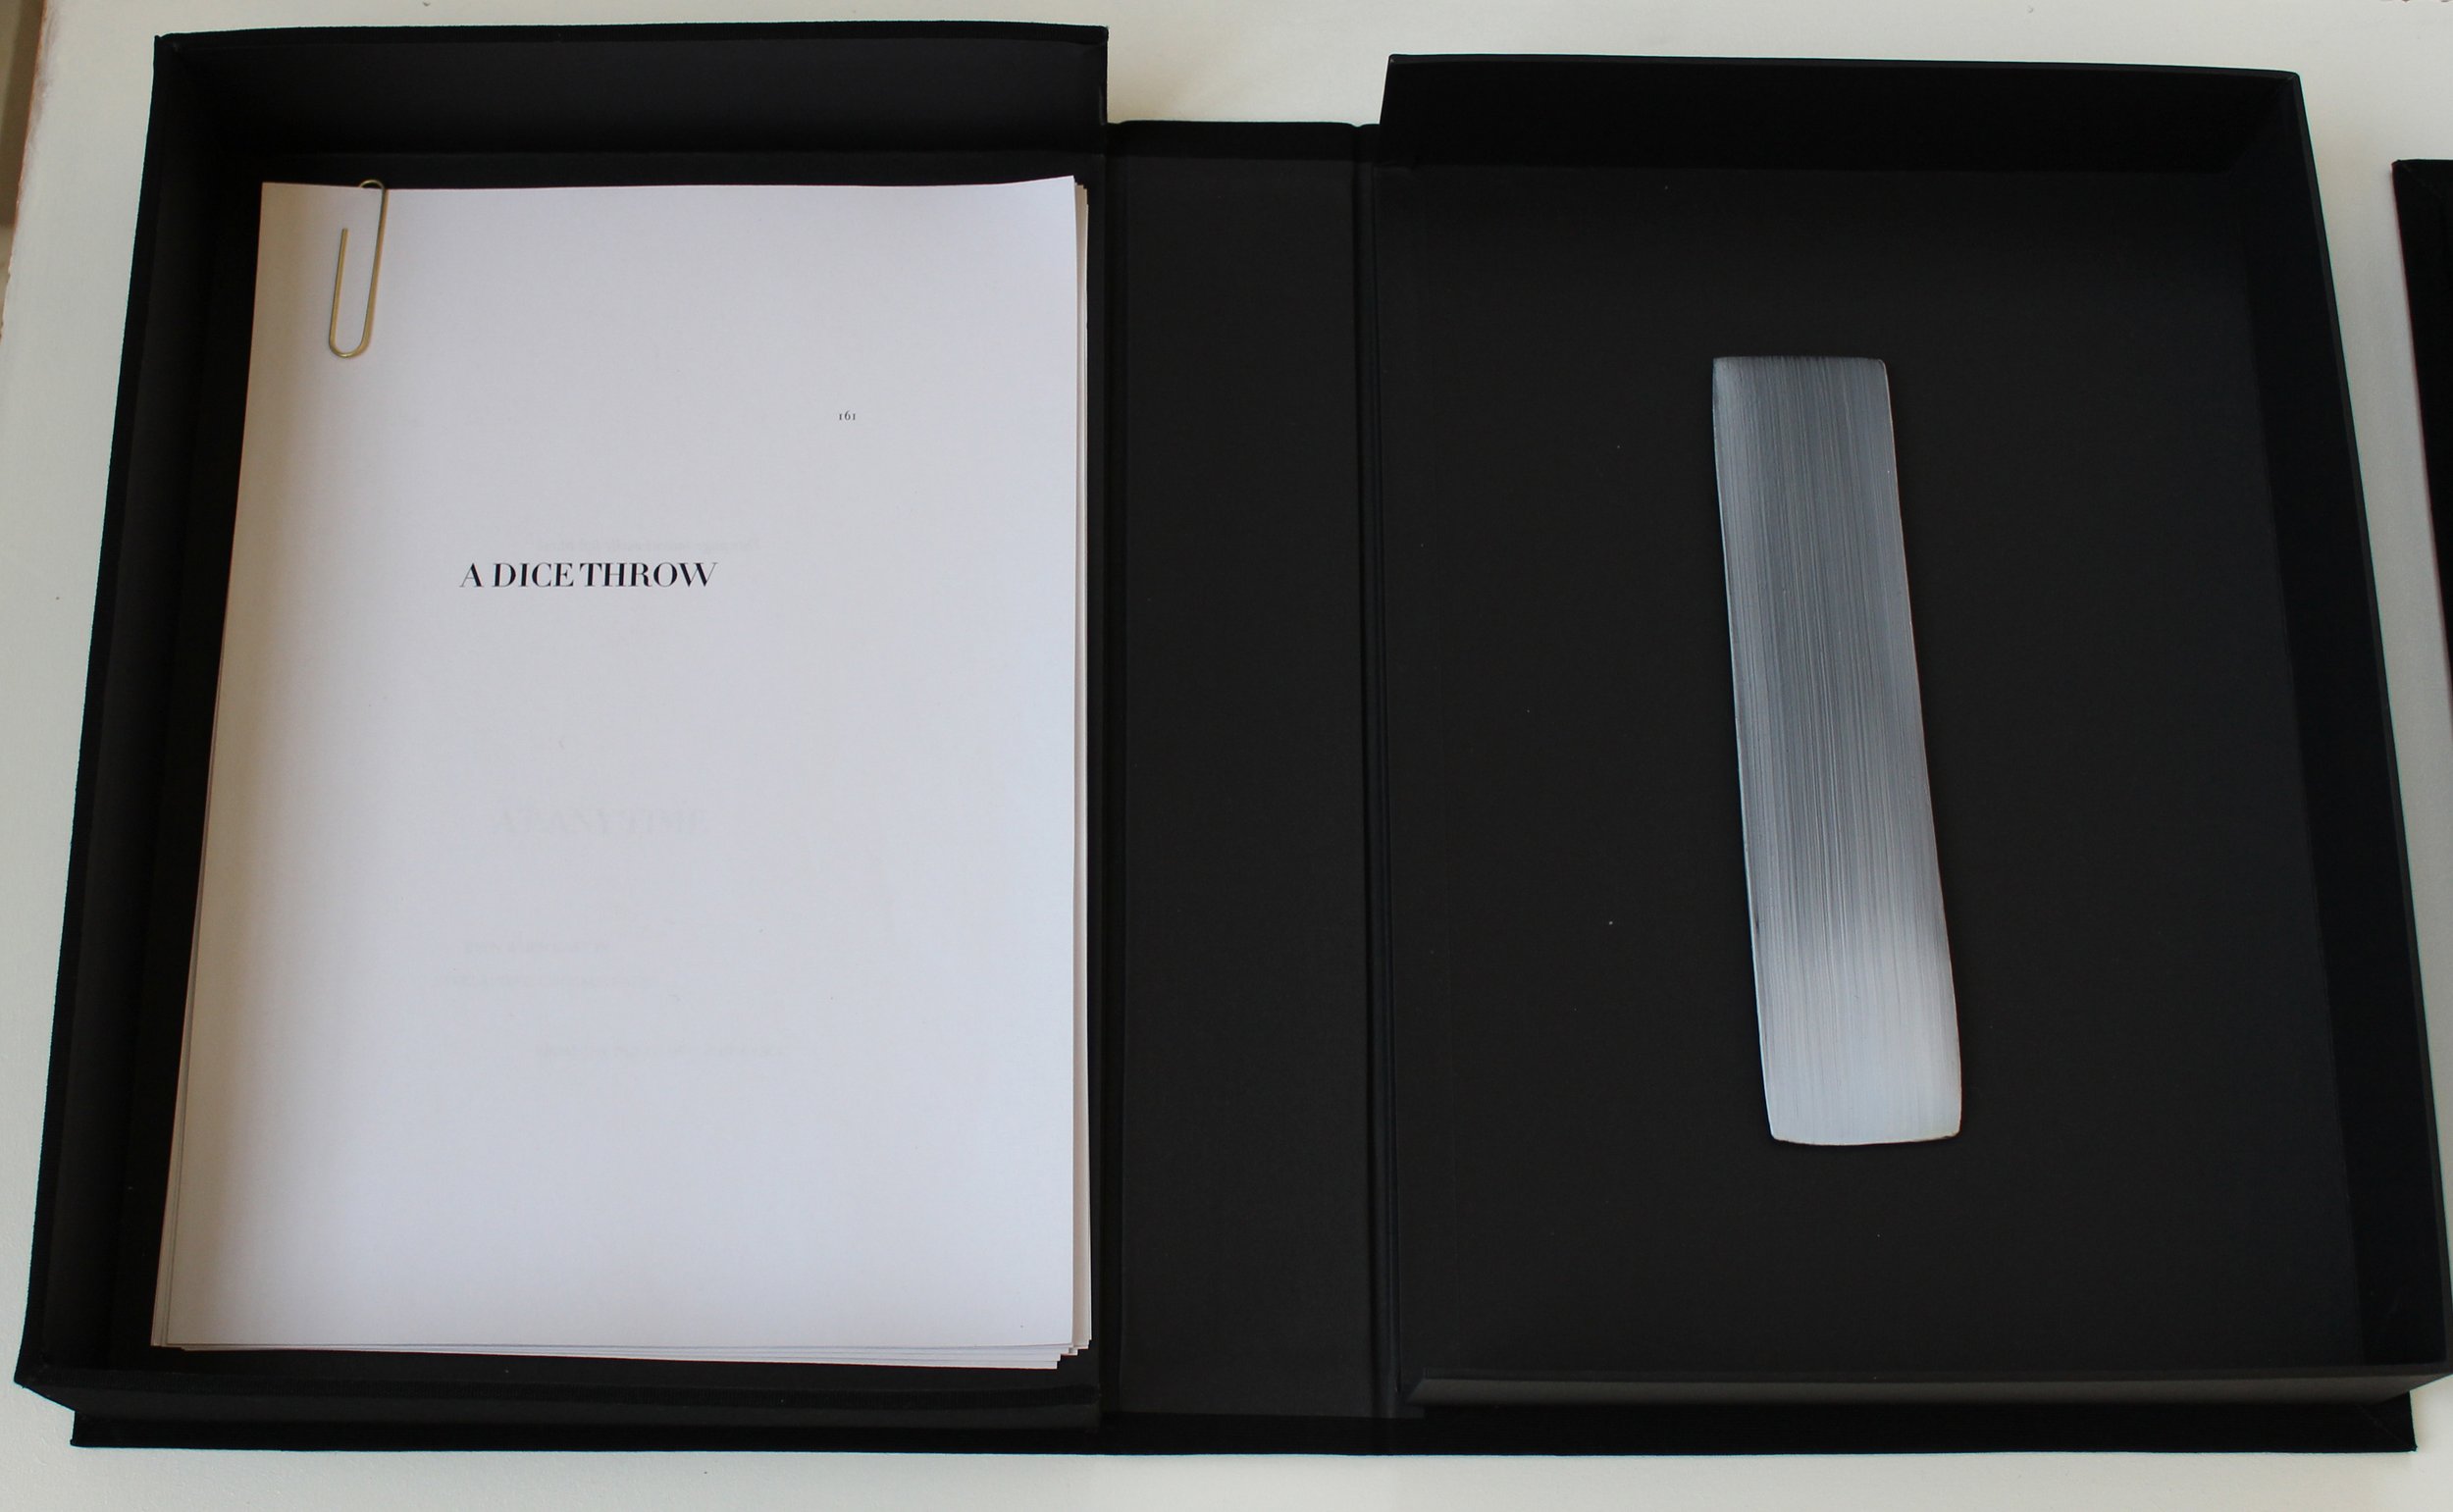  Photograph of an open black archive box displaying a translation of Mallarmé’s poem on the right. On the left, a small sculptural object or ‘brush mark’, which the artist refers to as a &nbsp;‘gesture’. 